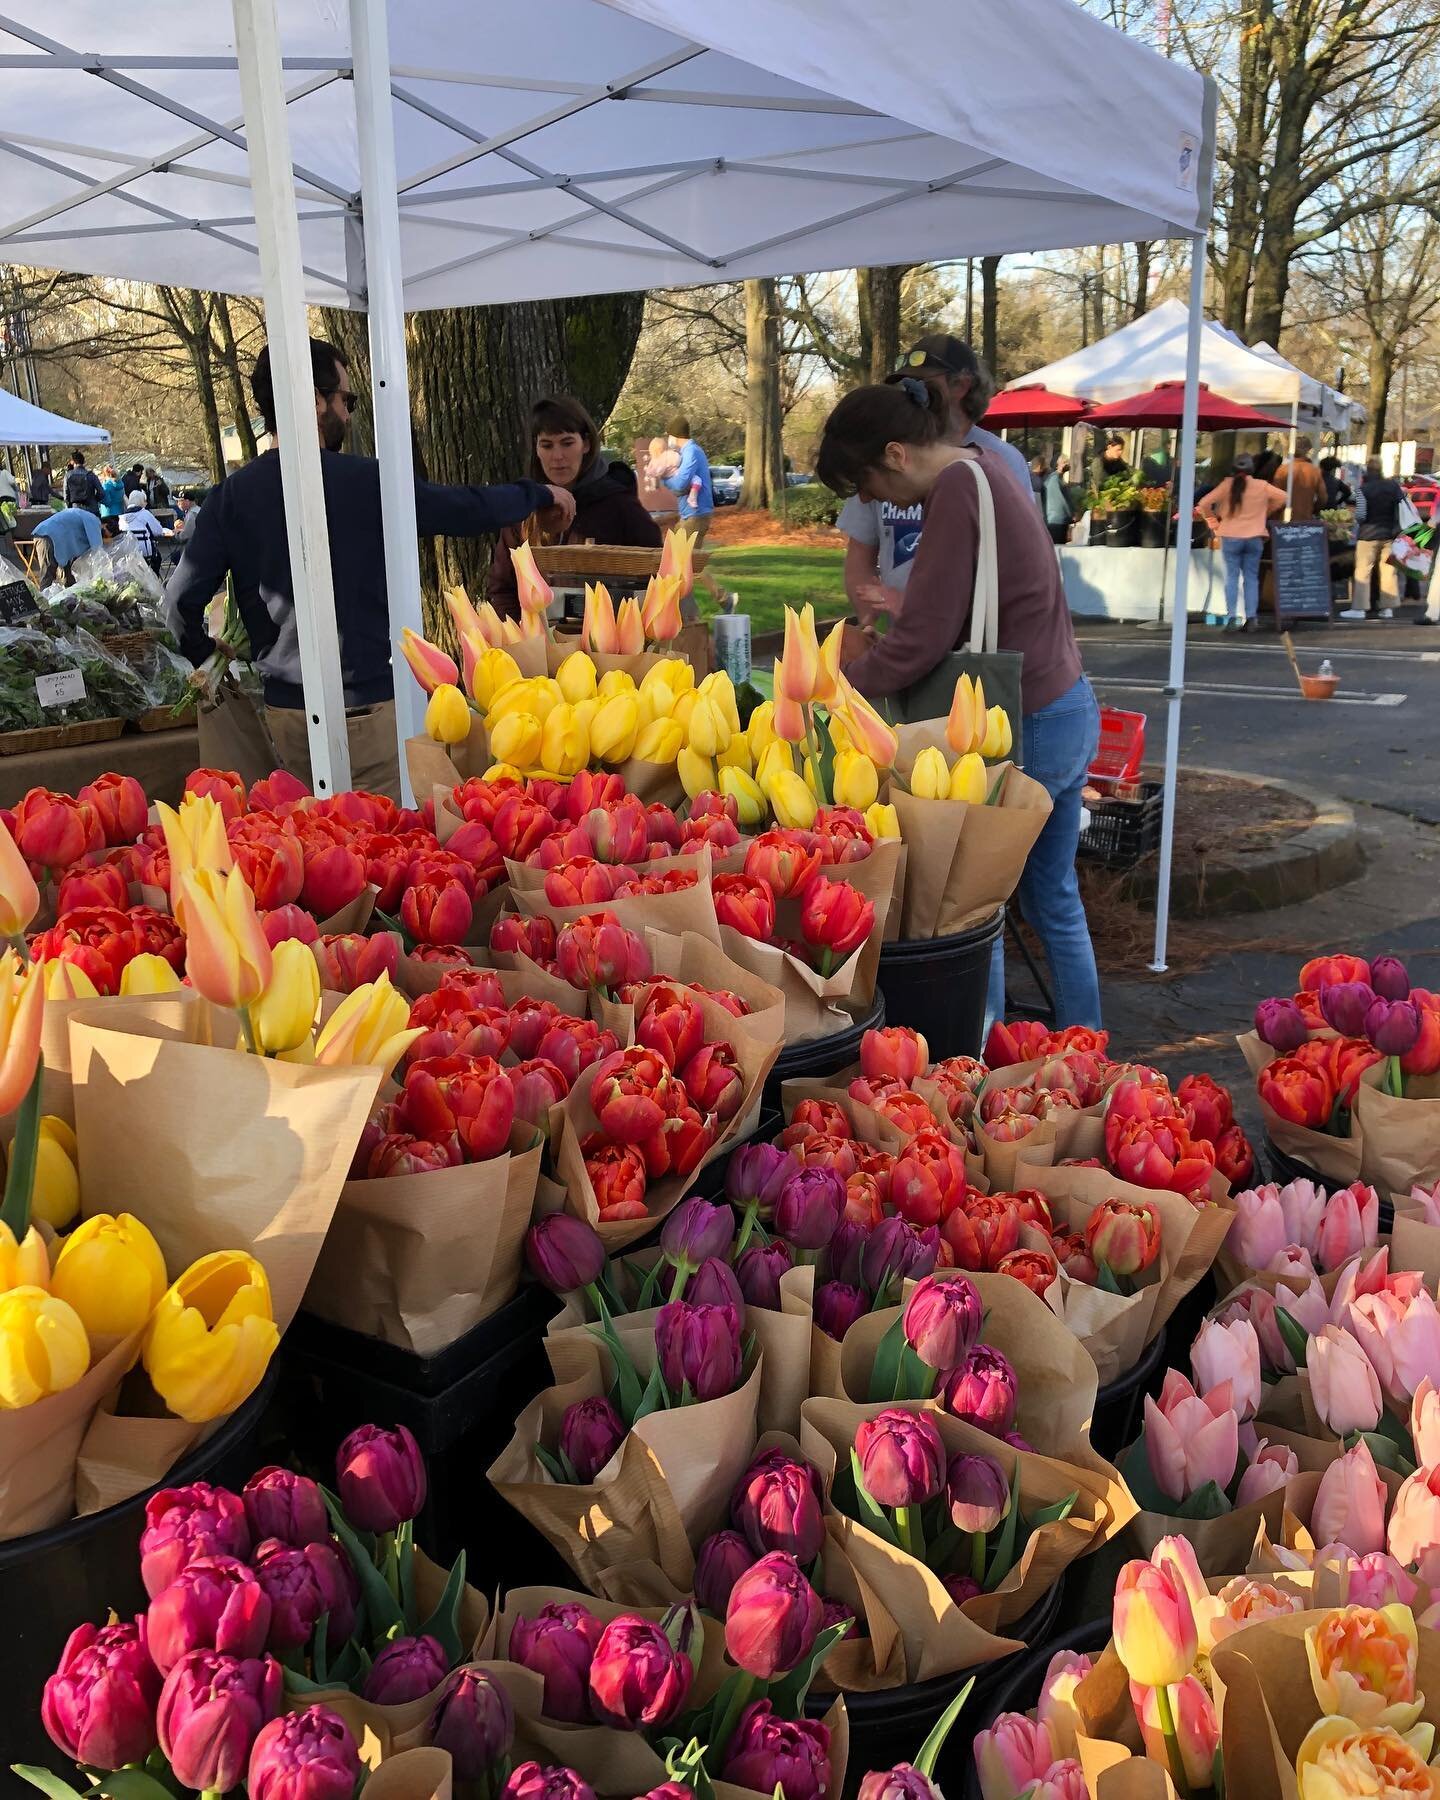 Springtime Funtimes Shop your local Farmers Market Every Saturday!
March 25, 2023 8:30am-Noon
Eat Fresh and Local every week with Freedom Farmers Market at the Carter Center
See who&rsquo;s at market this Saturday:
 
See who&rsquo;s at market this Sa